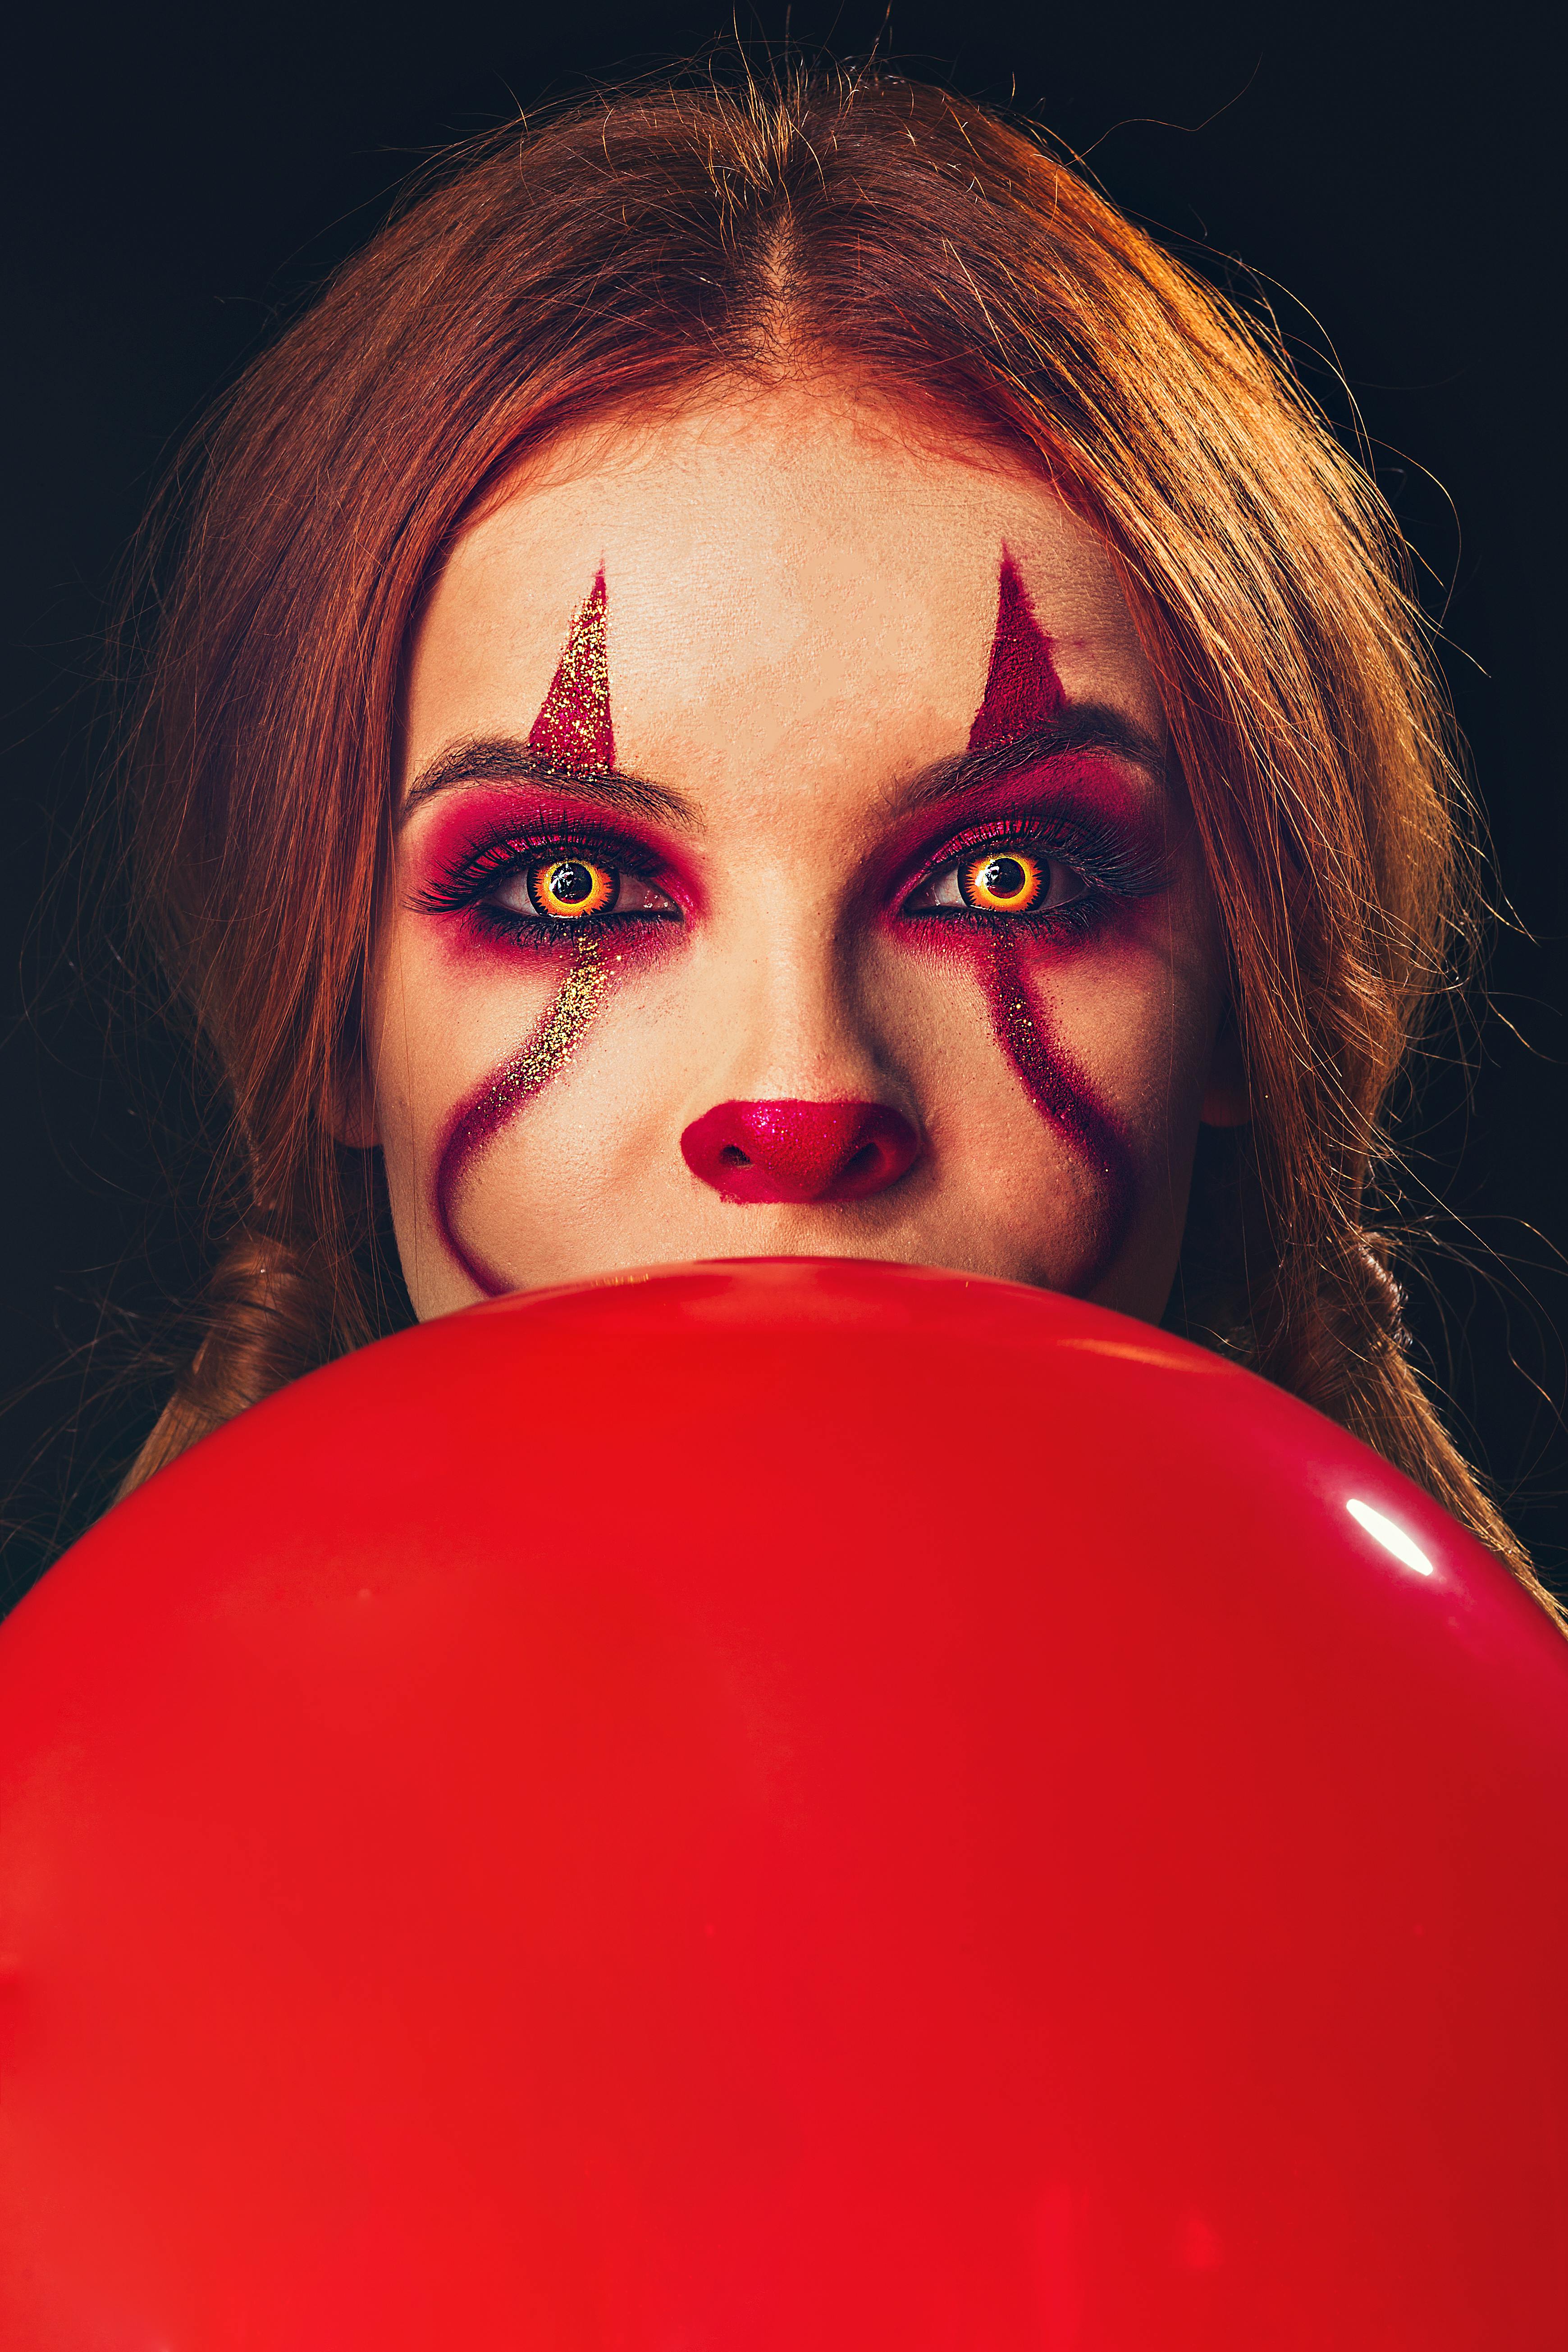 Female Model Wacky Red Face Paint Stock Photo 685392652